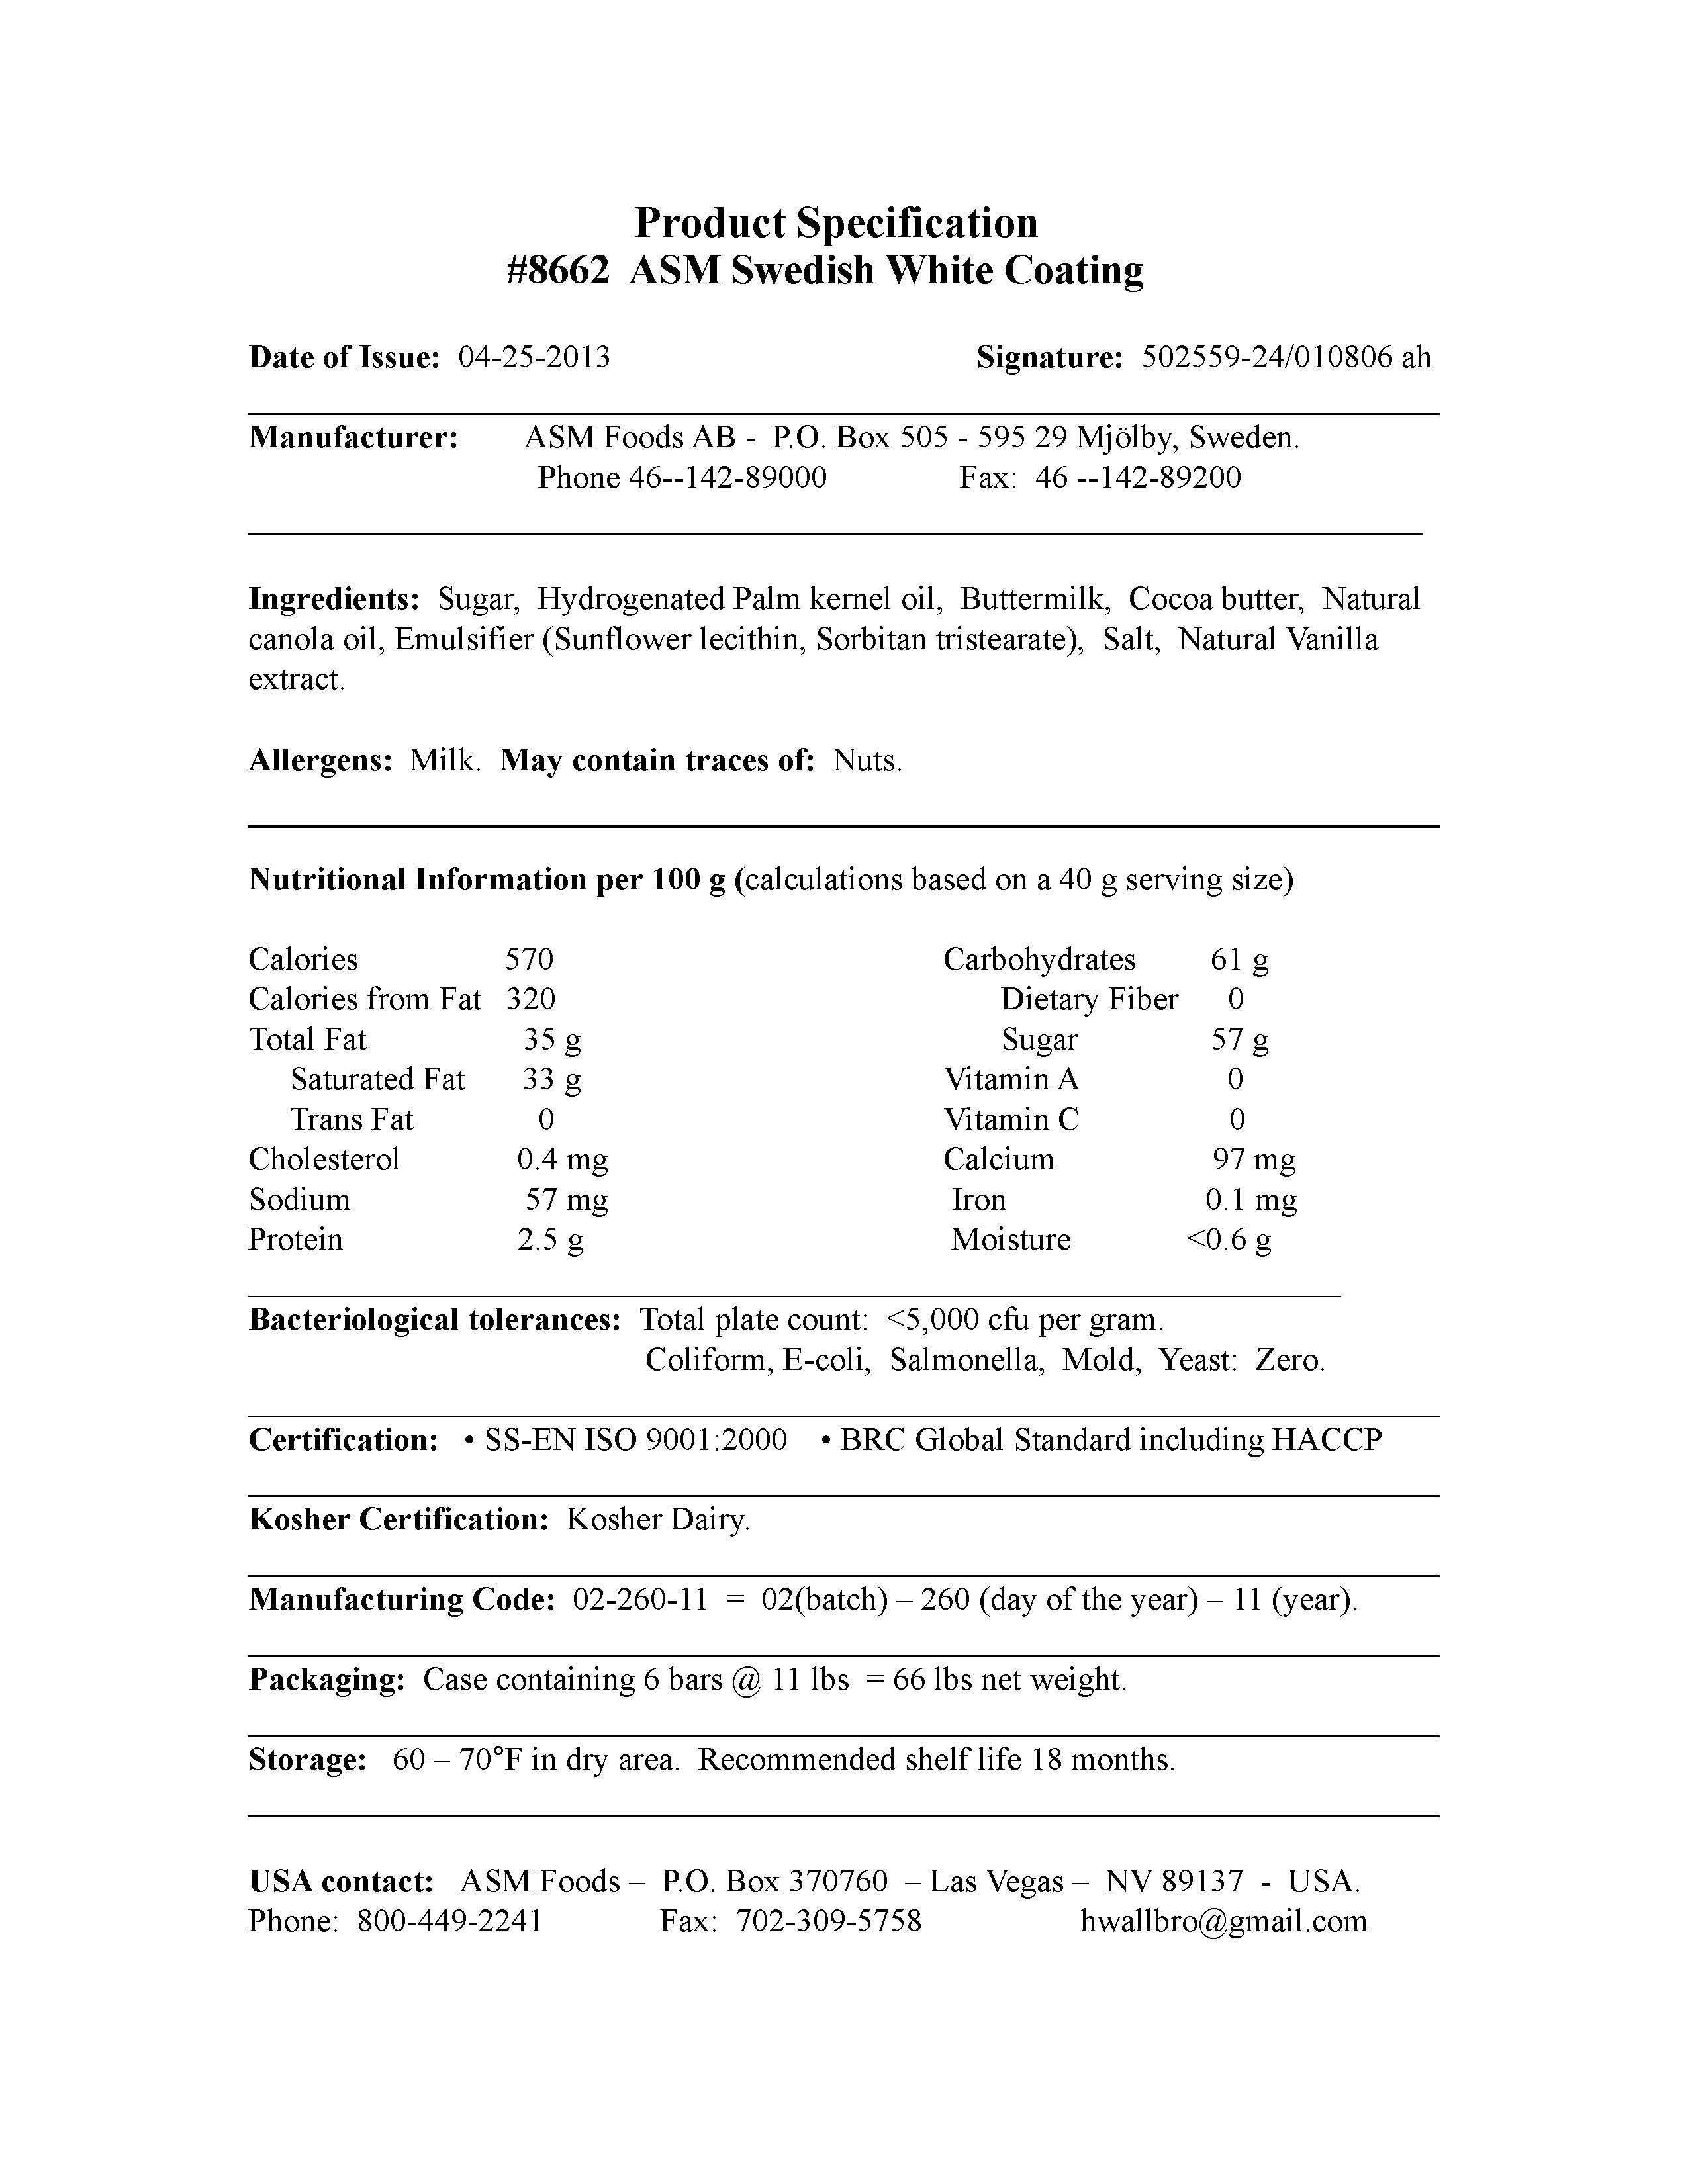 White Chocolate Coating Slab Nutritional Info by ASM/Semper at Stover & Company